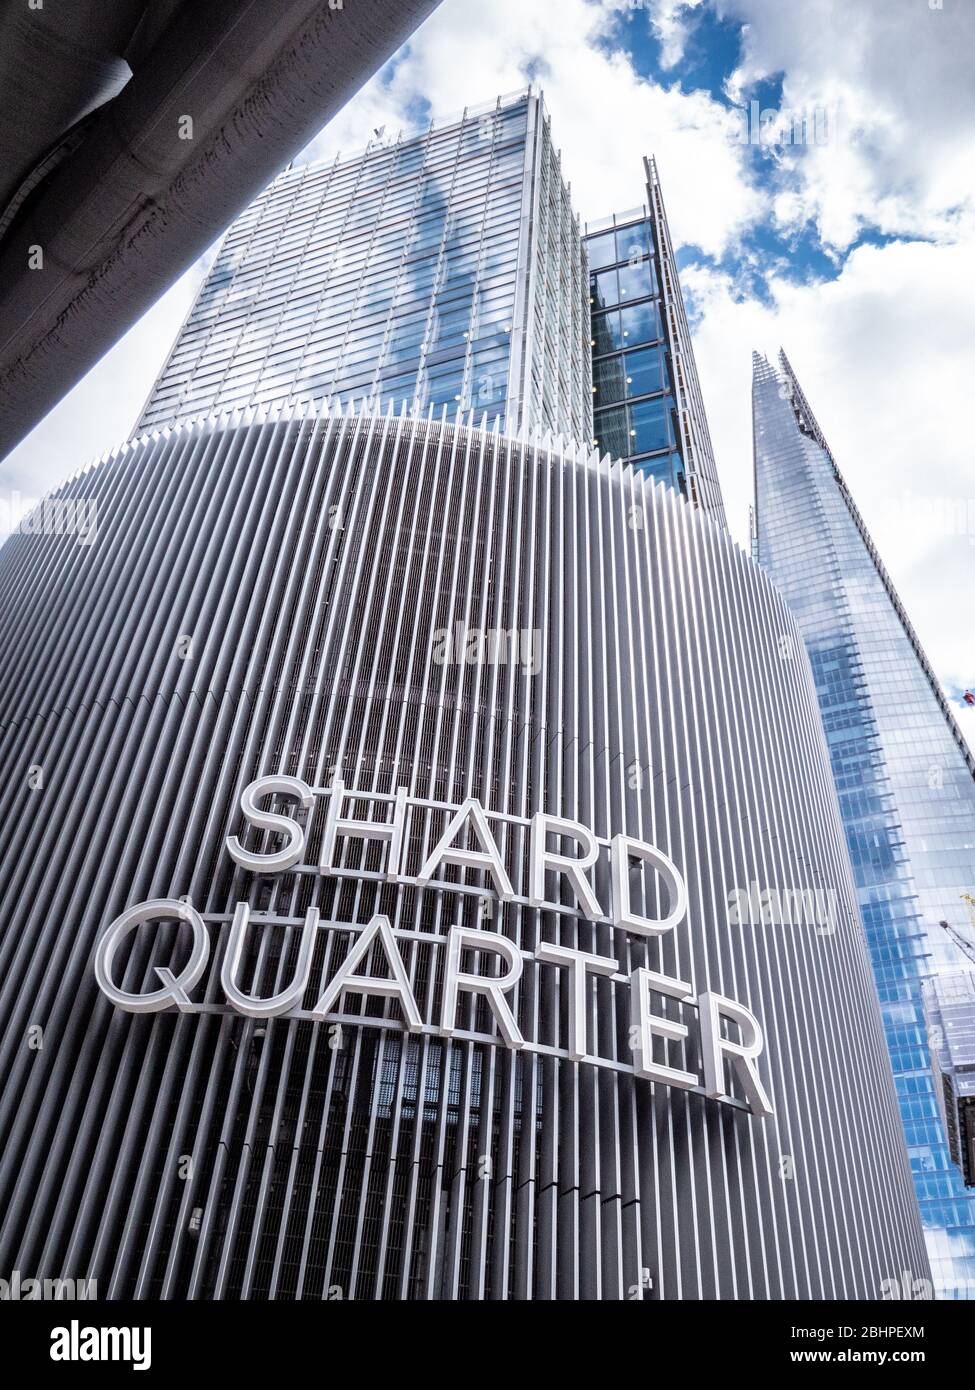 The Shard Quarter. Low, wide angle view of the iconic London Shard building with foreground signage and neighbouring architecture. Stock Photo